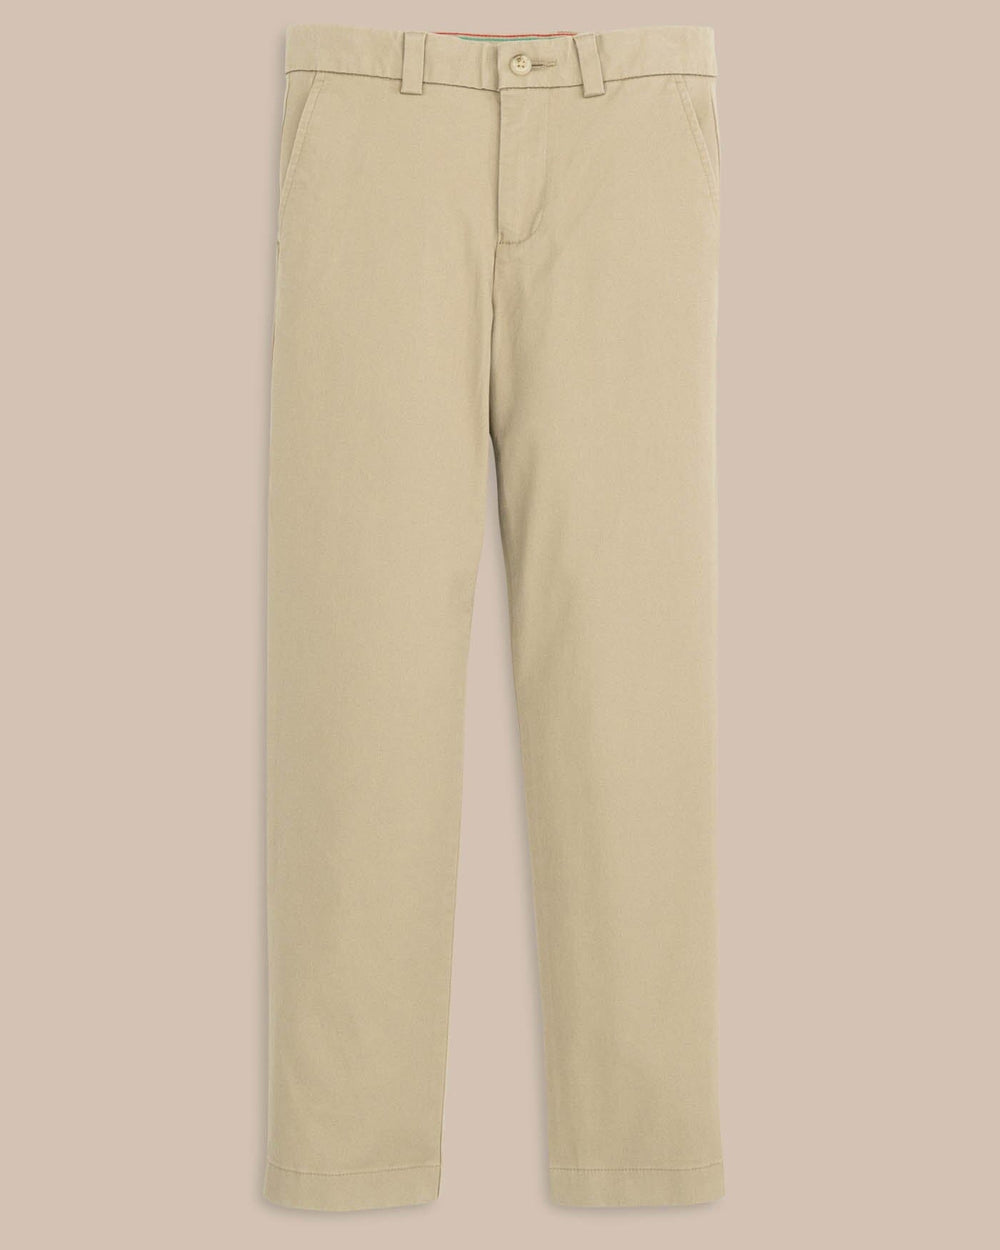 The front view of the Boys Channel Marker Pant by Southern Tide - Sandstone Khaki